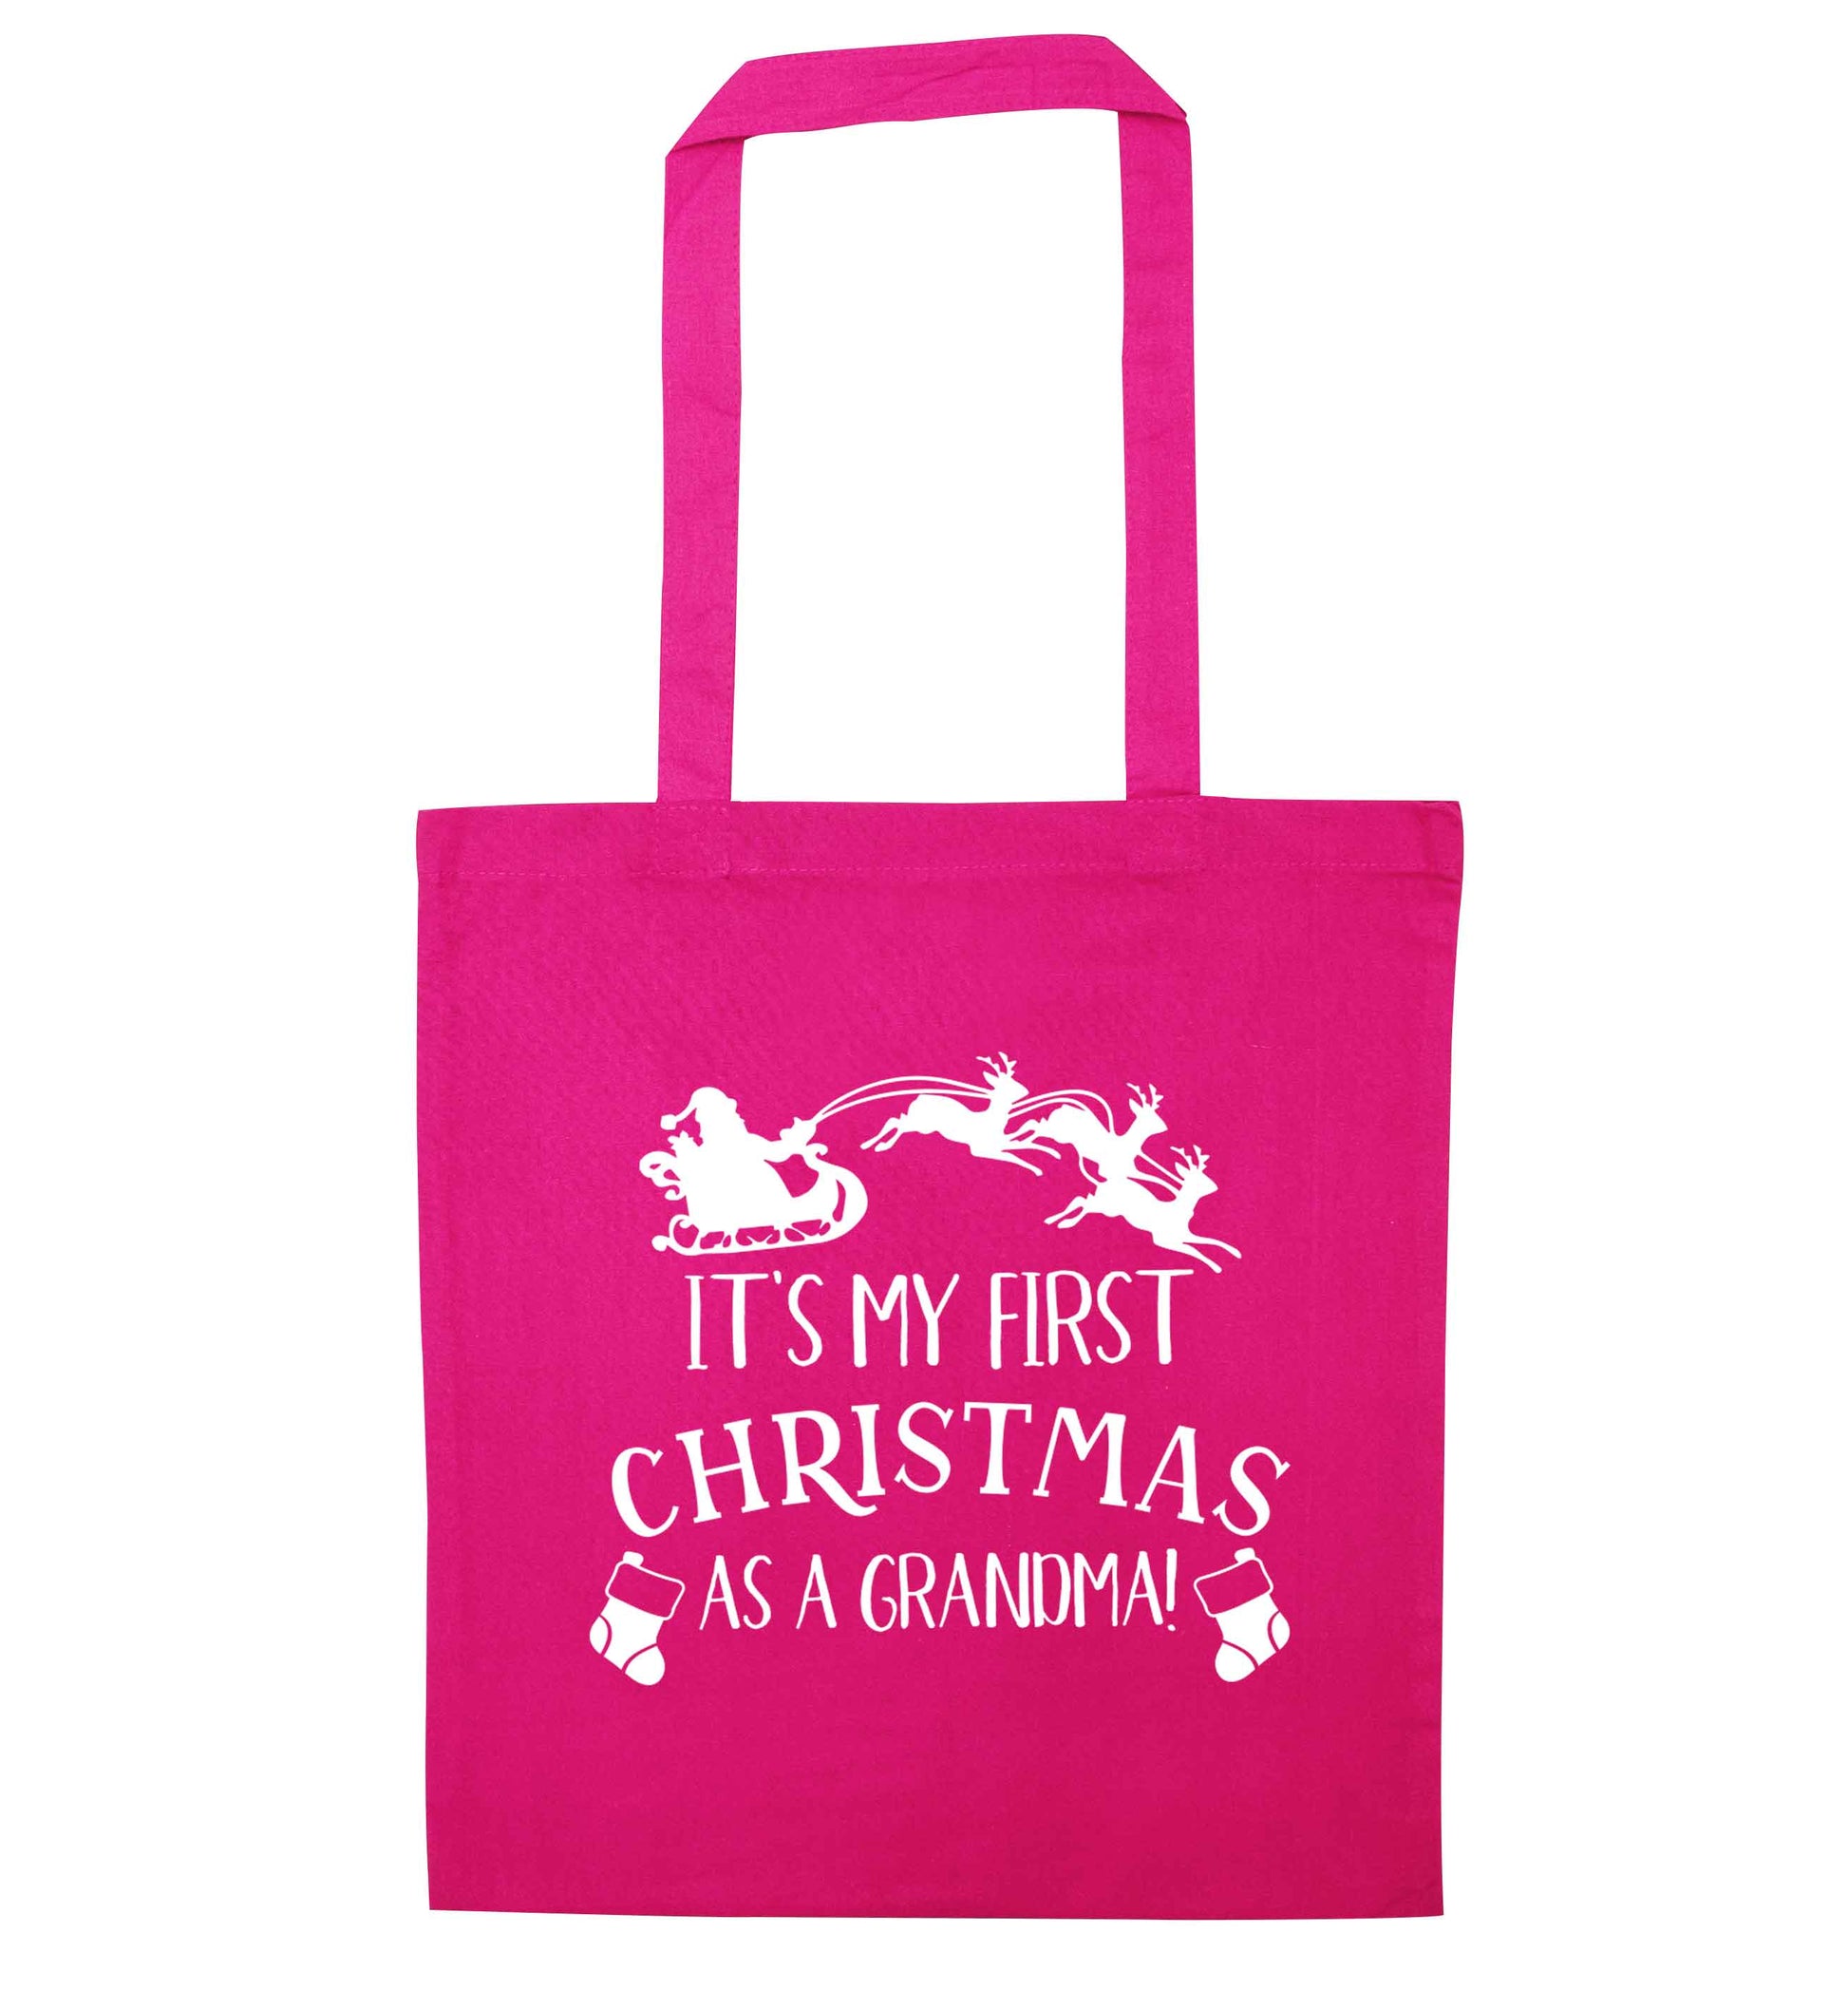 It's my first Christmas as a grandma! pink tote bag